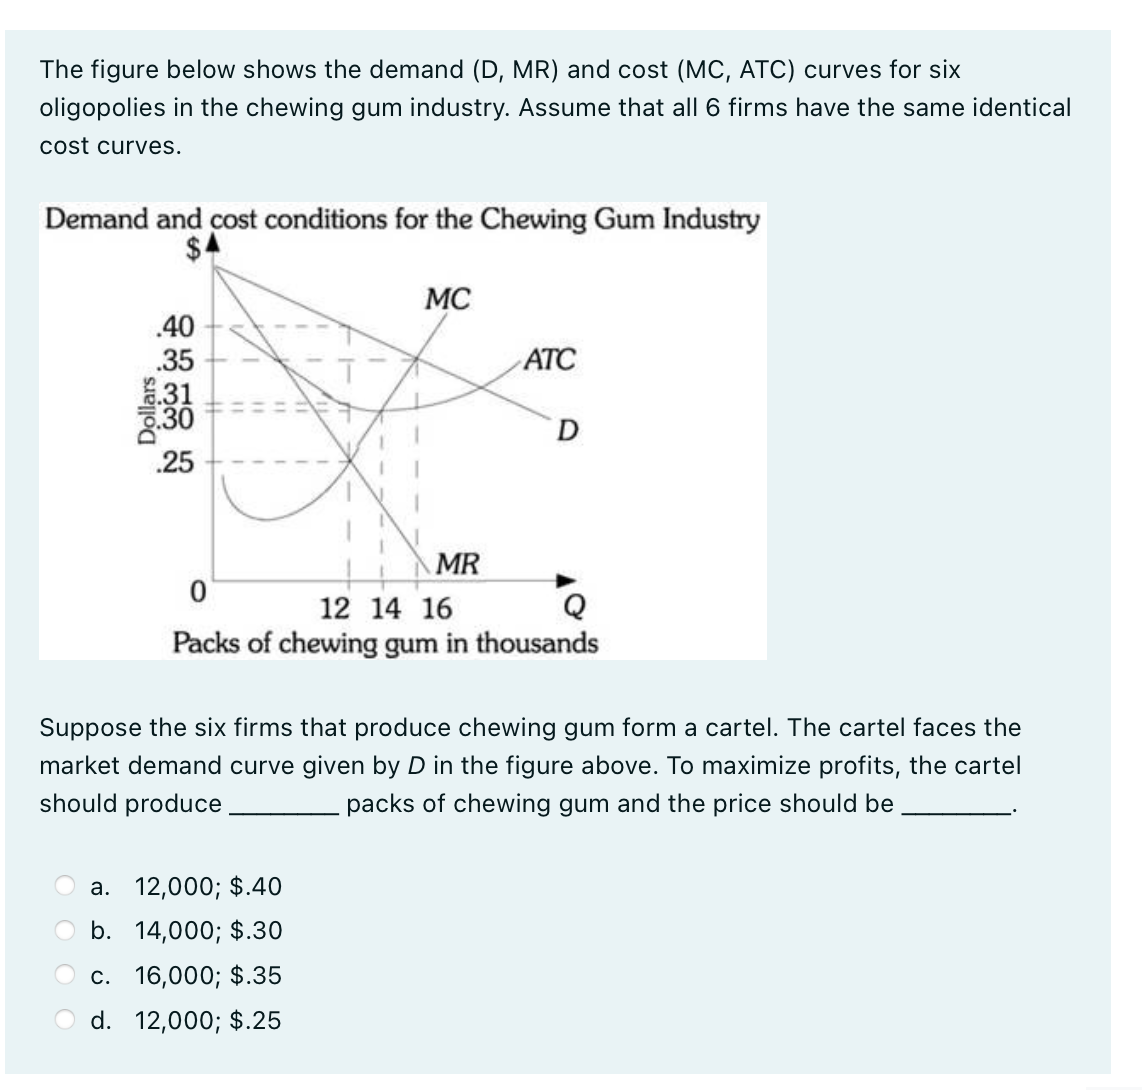 The figure below shows the demand (D, MR) and cost (MC, ATC) curves for six
oligopolies in the chewing gum industry. Assume that all 6 firms have the same identical
cost curves.
Demand and cost conditions for the Chewing Gum Industry
$4
Dollars
.40
.35
.25
MC
MR
a. 12,000; $.40
b. 14,000; $.30
c. 16,000; $.35
d. 12,000; $.25
ATC
D
0
12 14 16
Packs of chewing gum in thousands
Suppose the six firms that produce chewing gum form a cartel. The cartel faces the
market demand curve given by D in the figure above. To maximize profits, the cartel
should produce
packs of chewing gum and the price should be